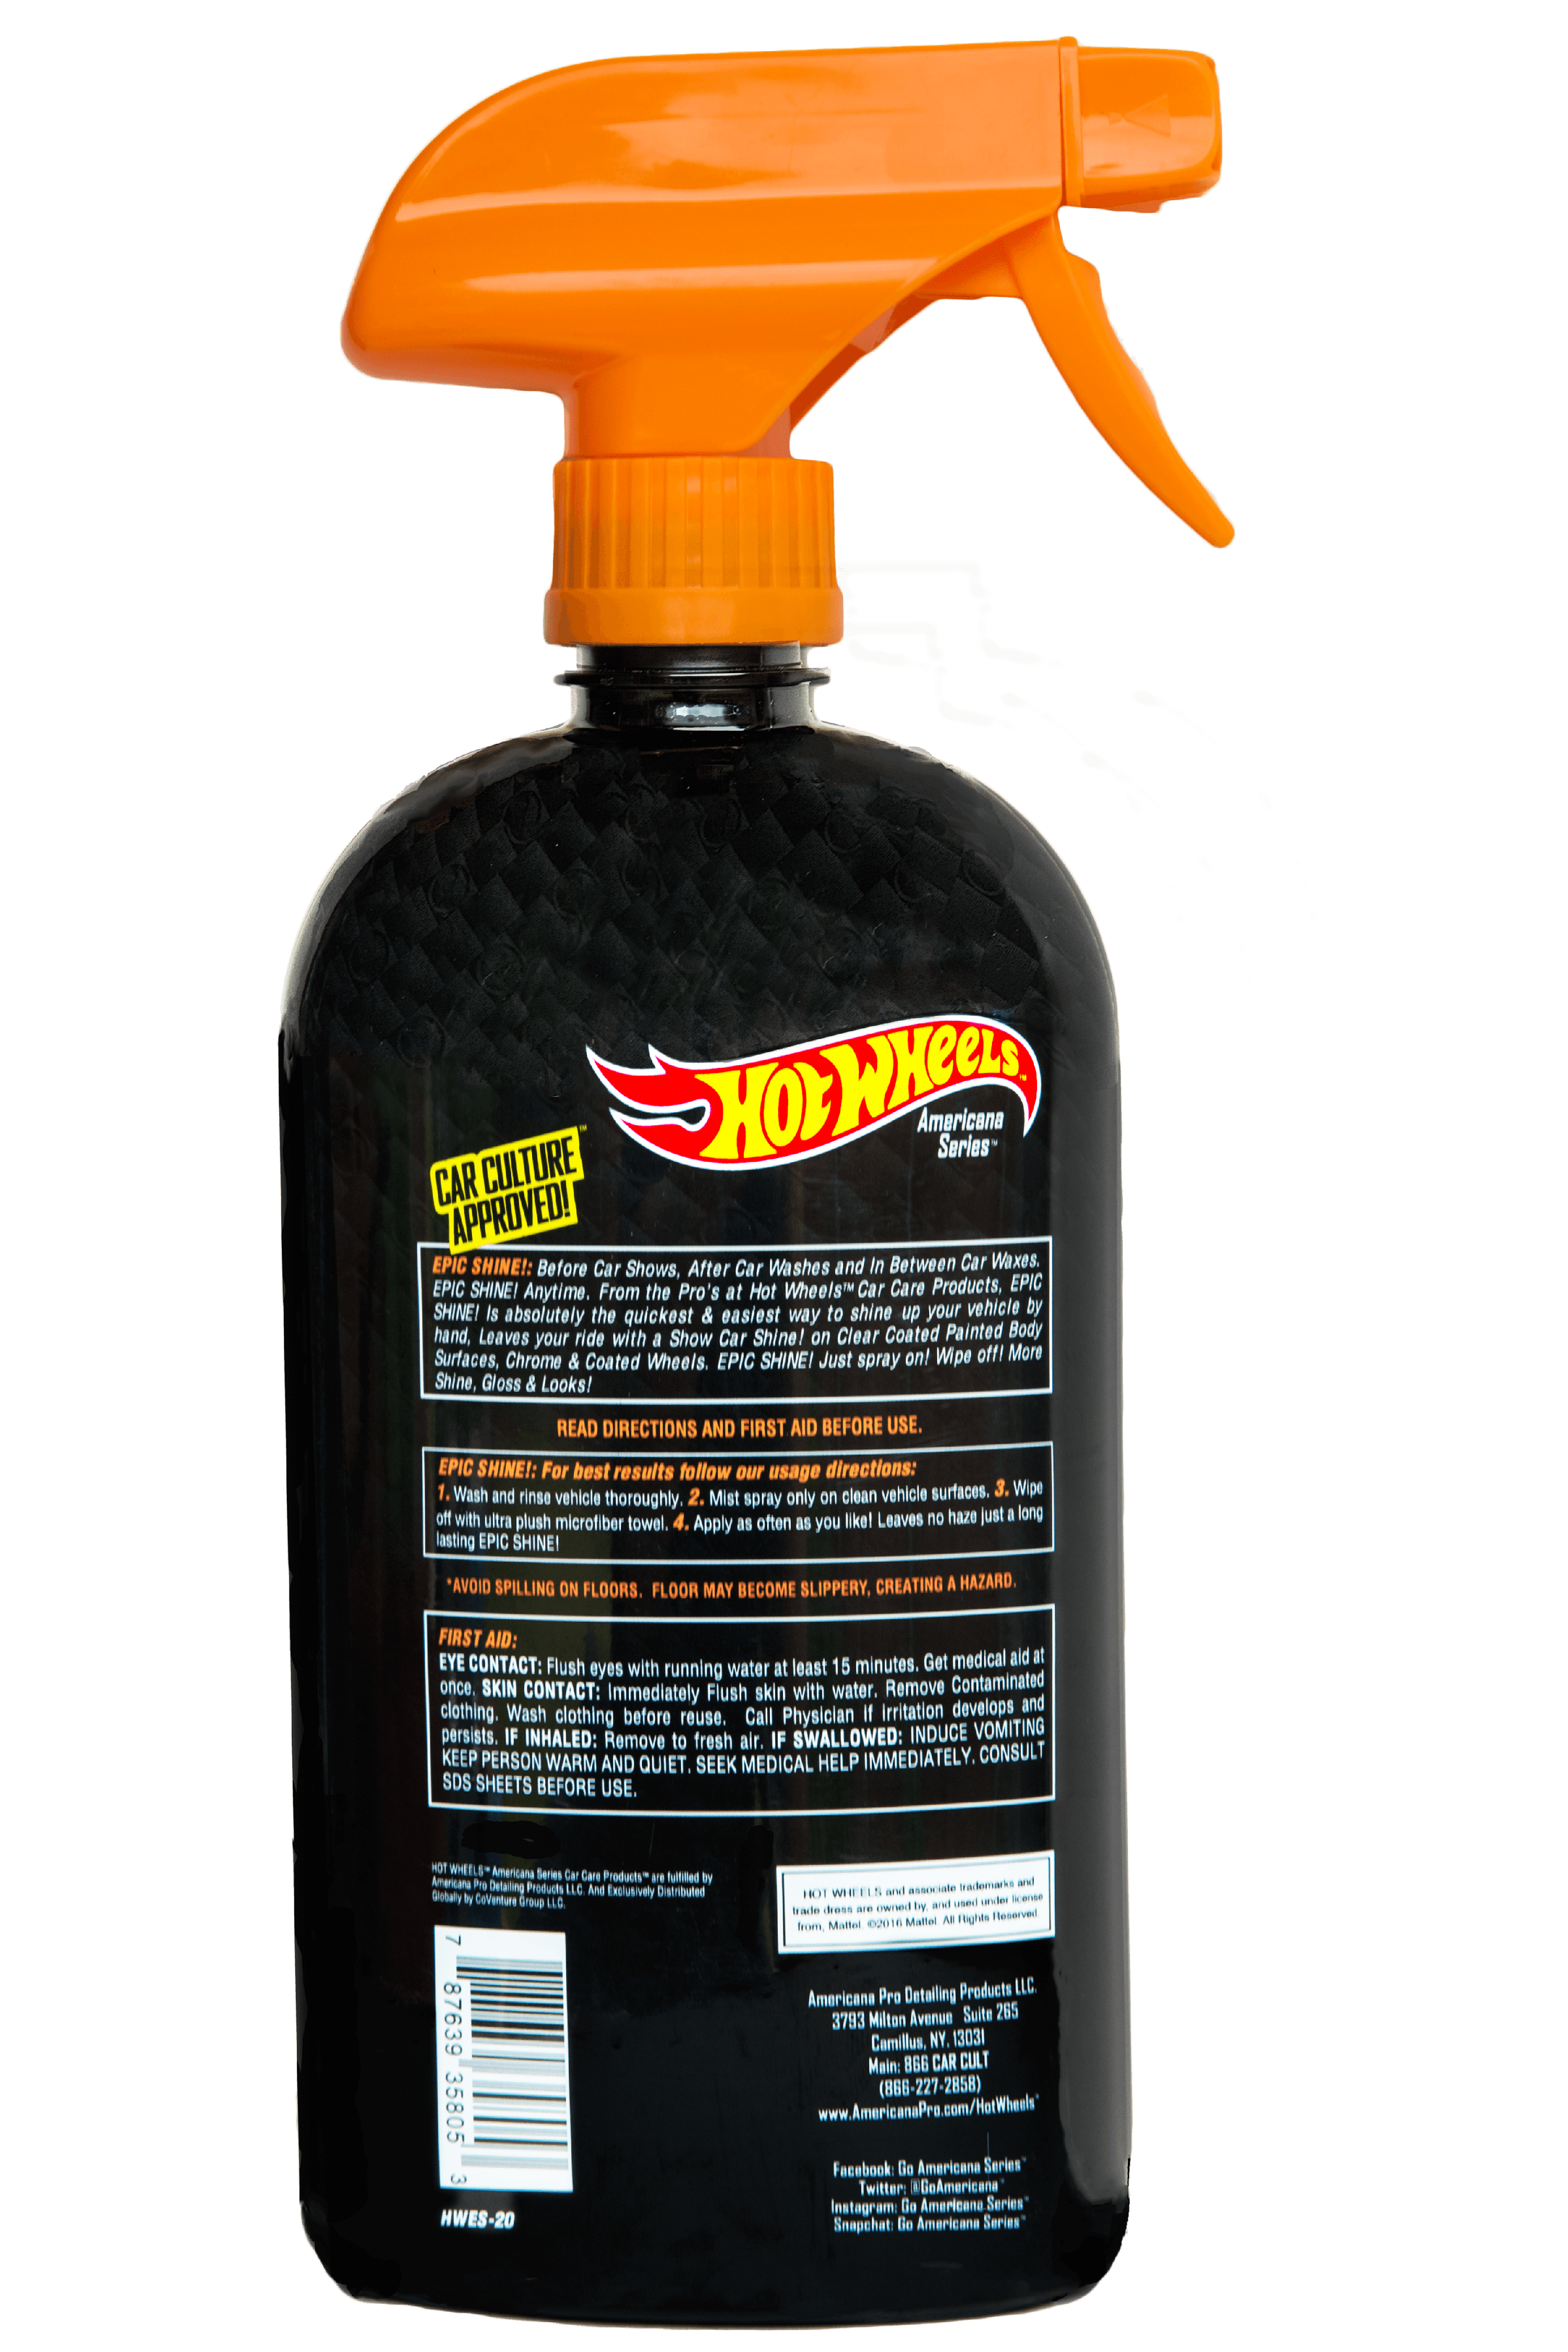 The Best Car Cleaning Products For Your Vehicle